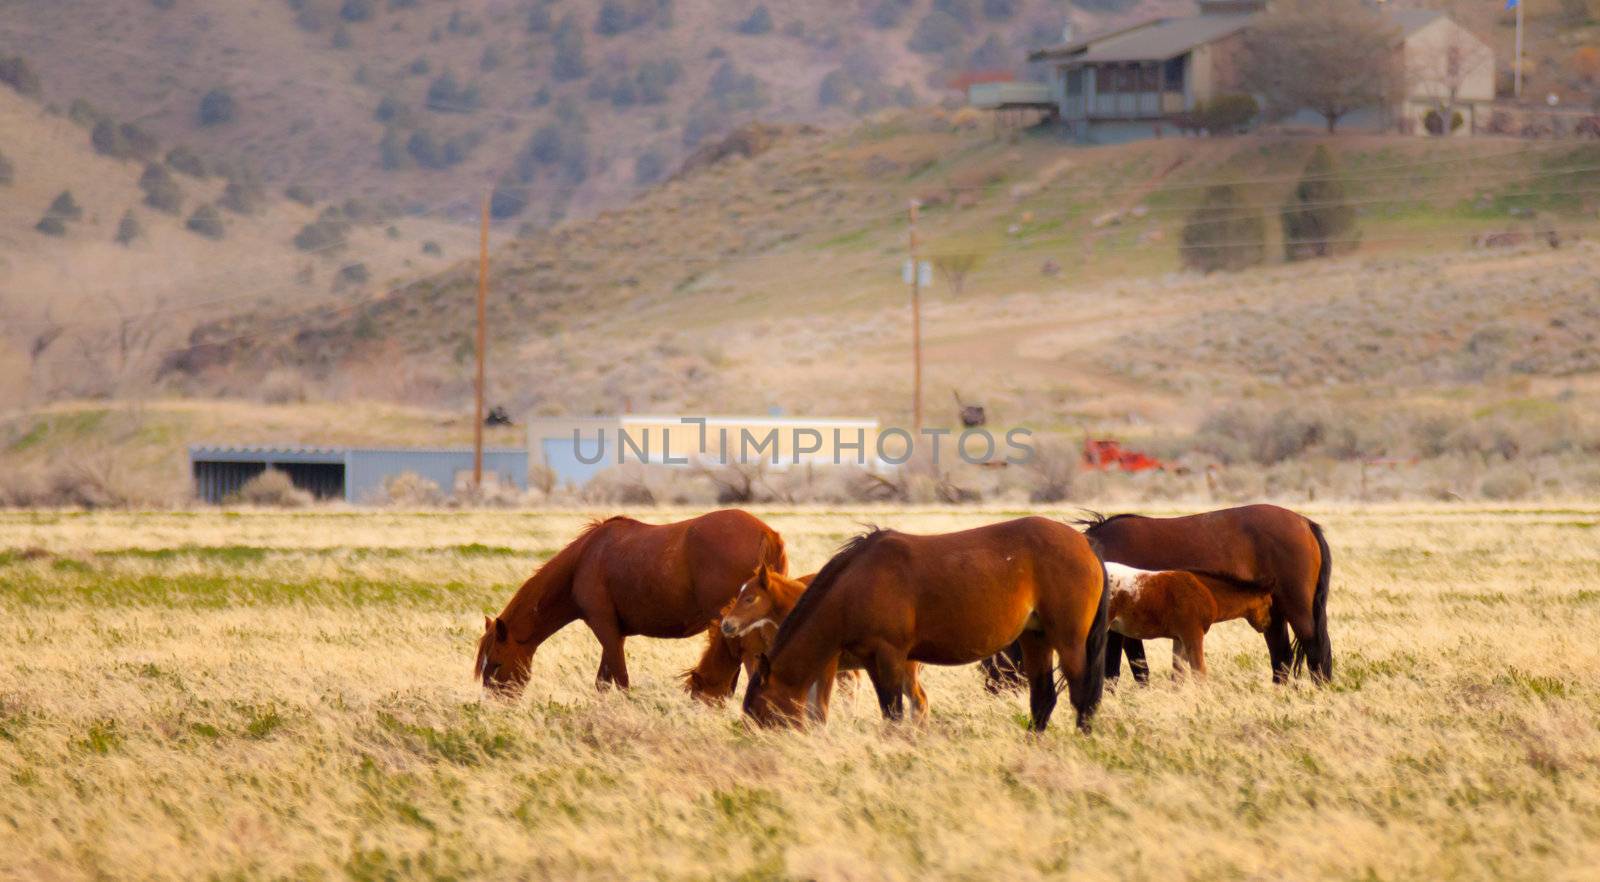 A family of wild horses gets close to civilization.